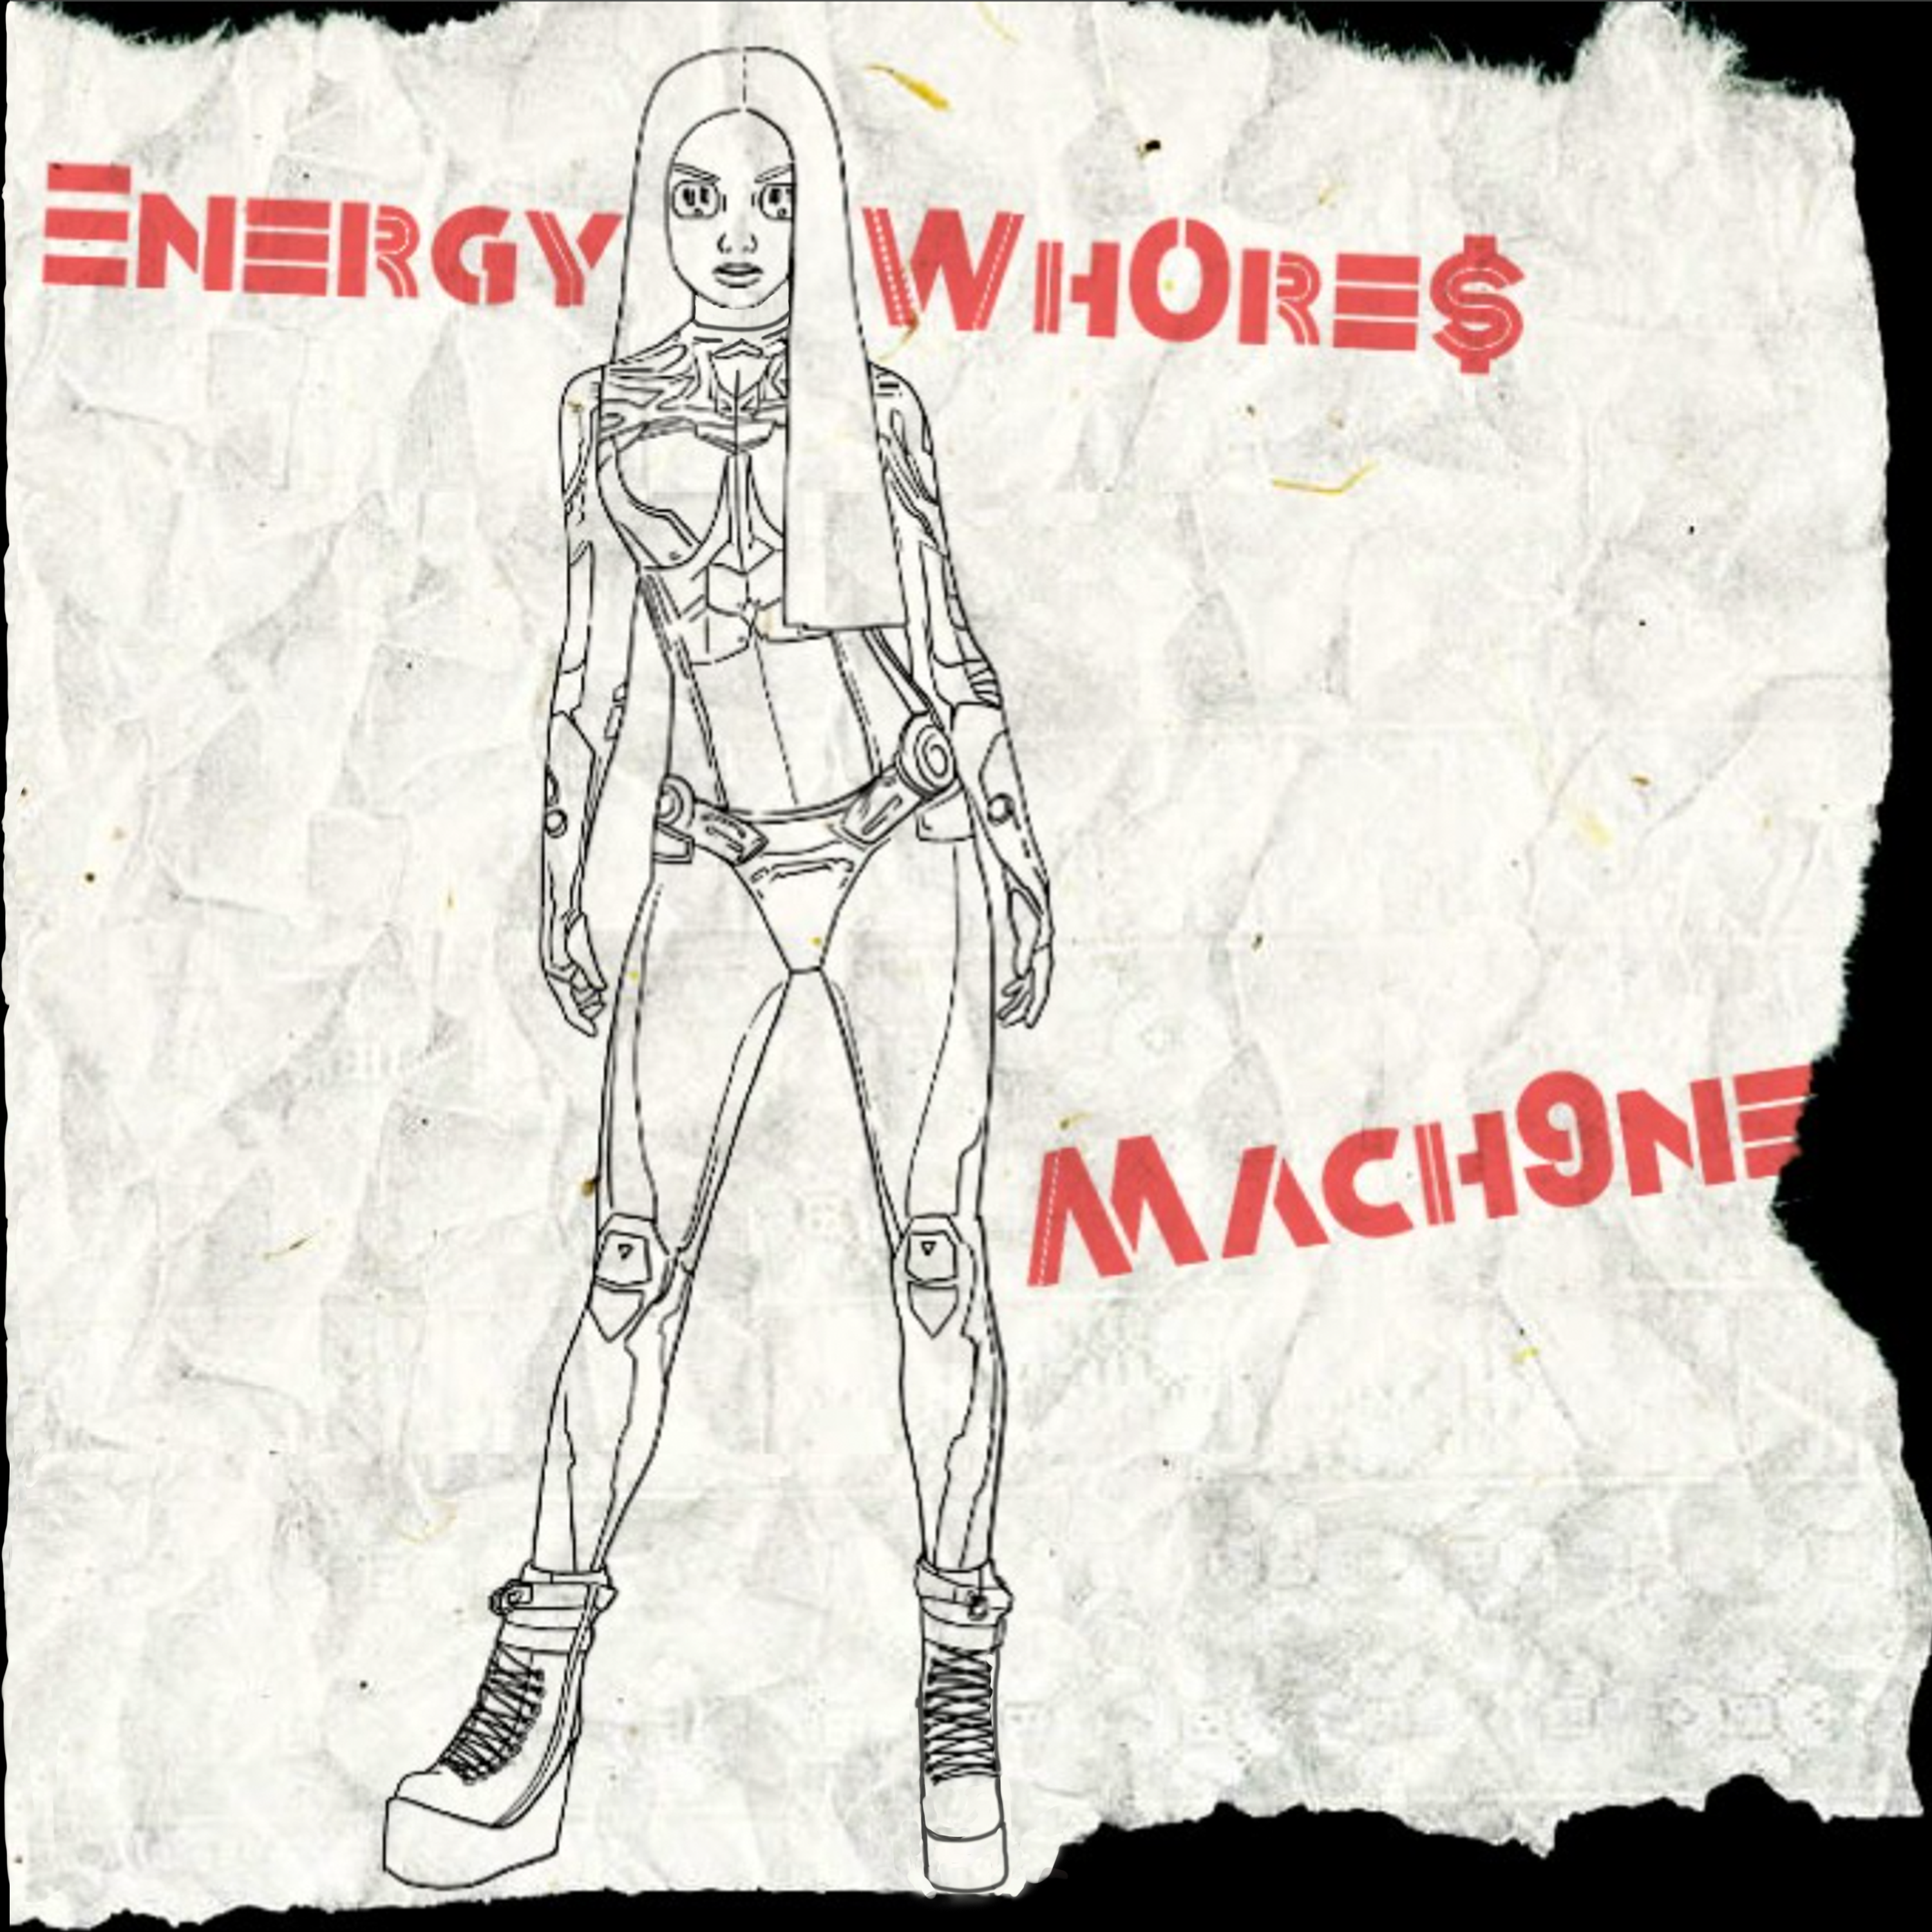 Exploring the Intersection of Art, Technology, and Humanity: Energy Whores’ “MACH9NE”